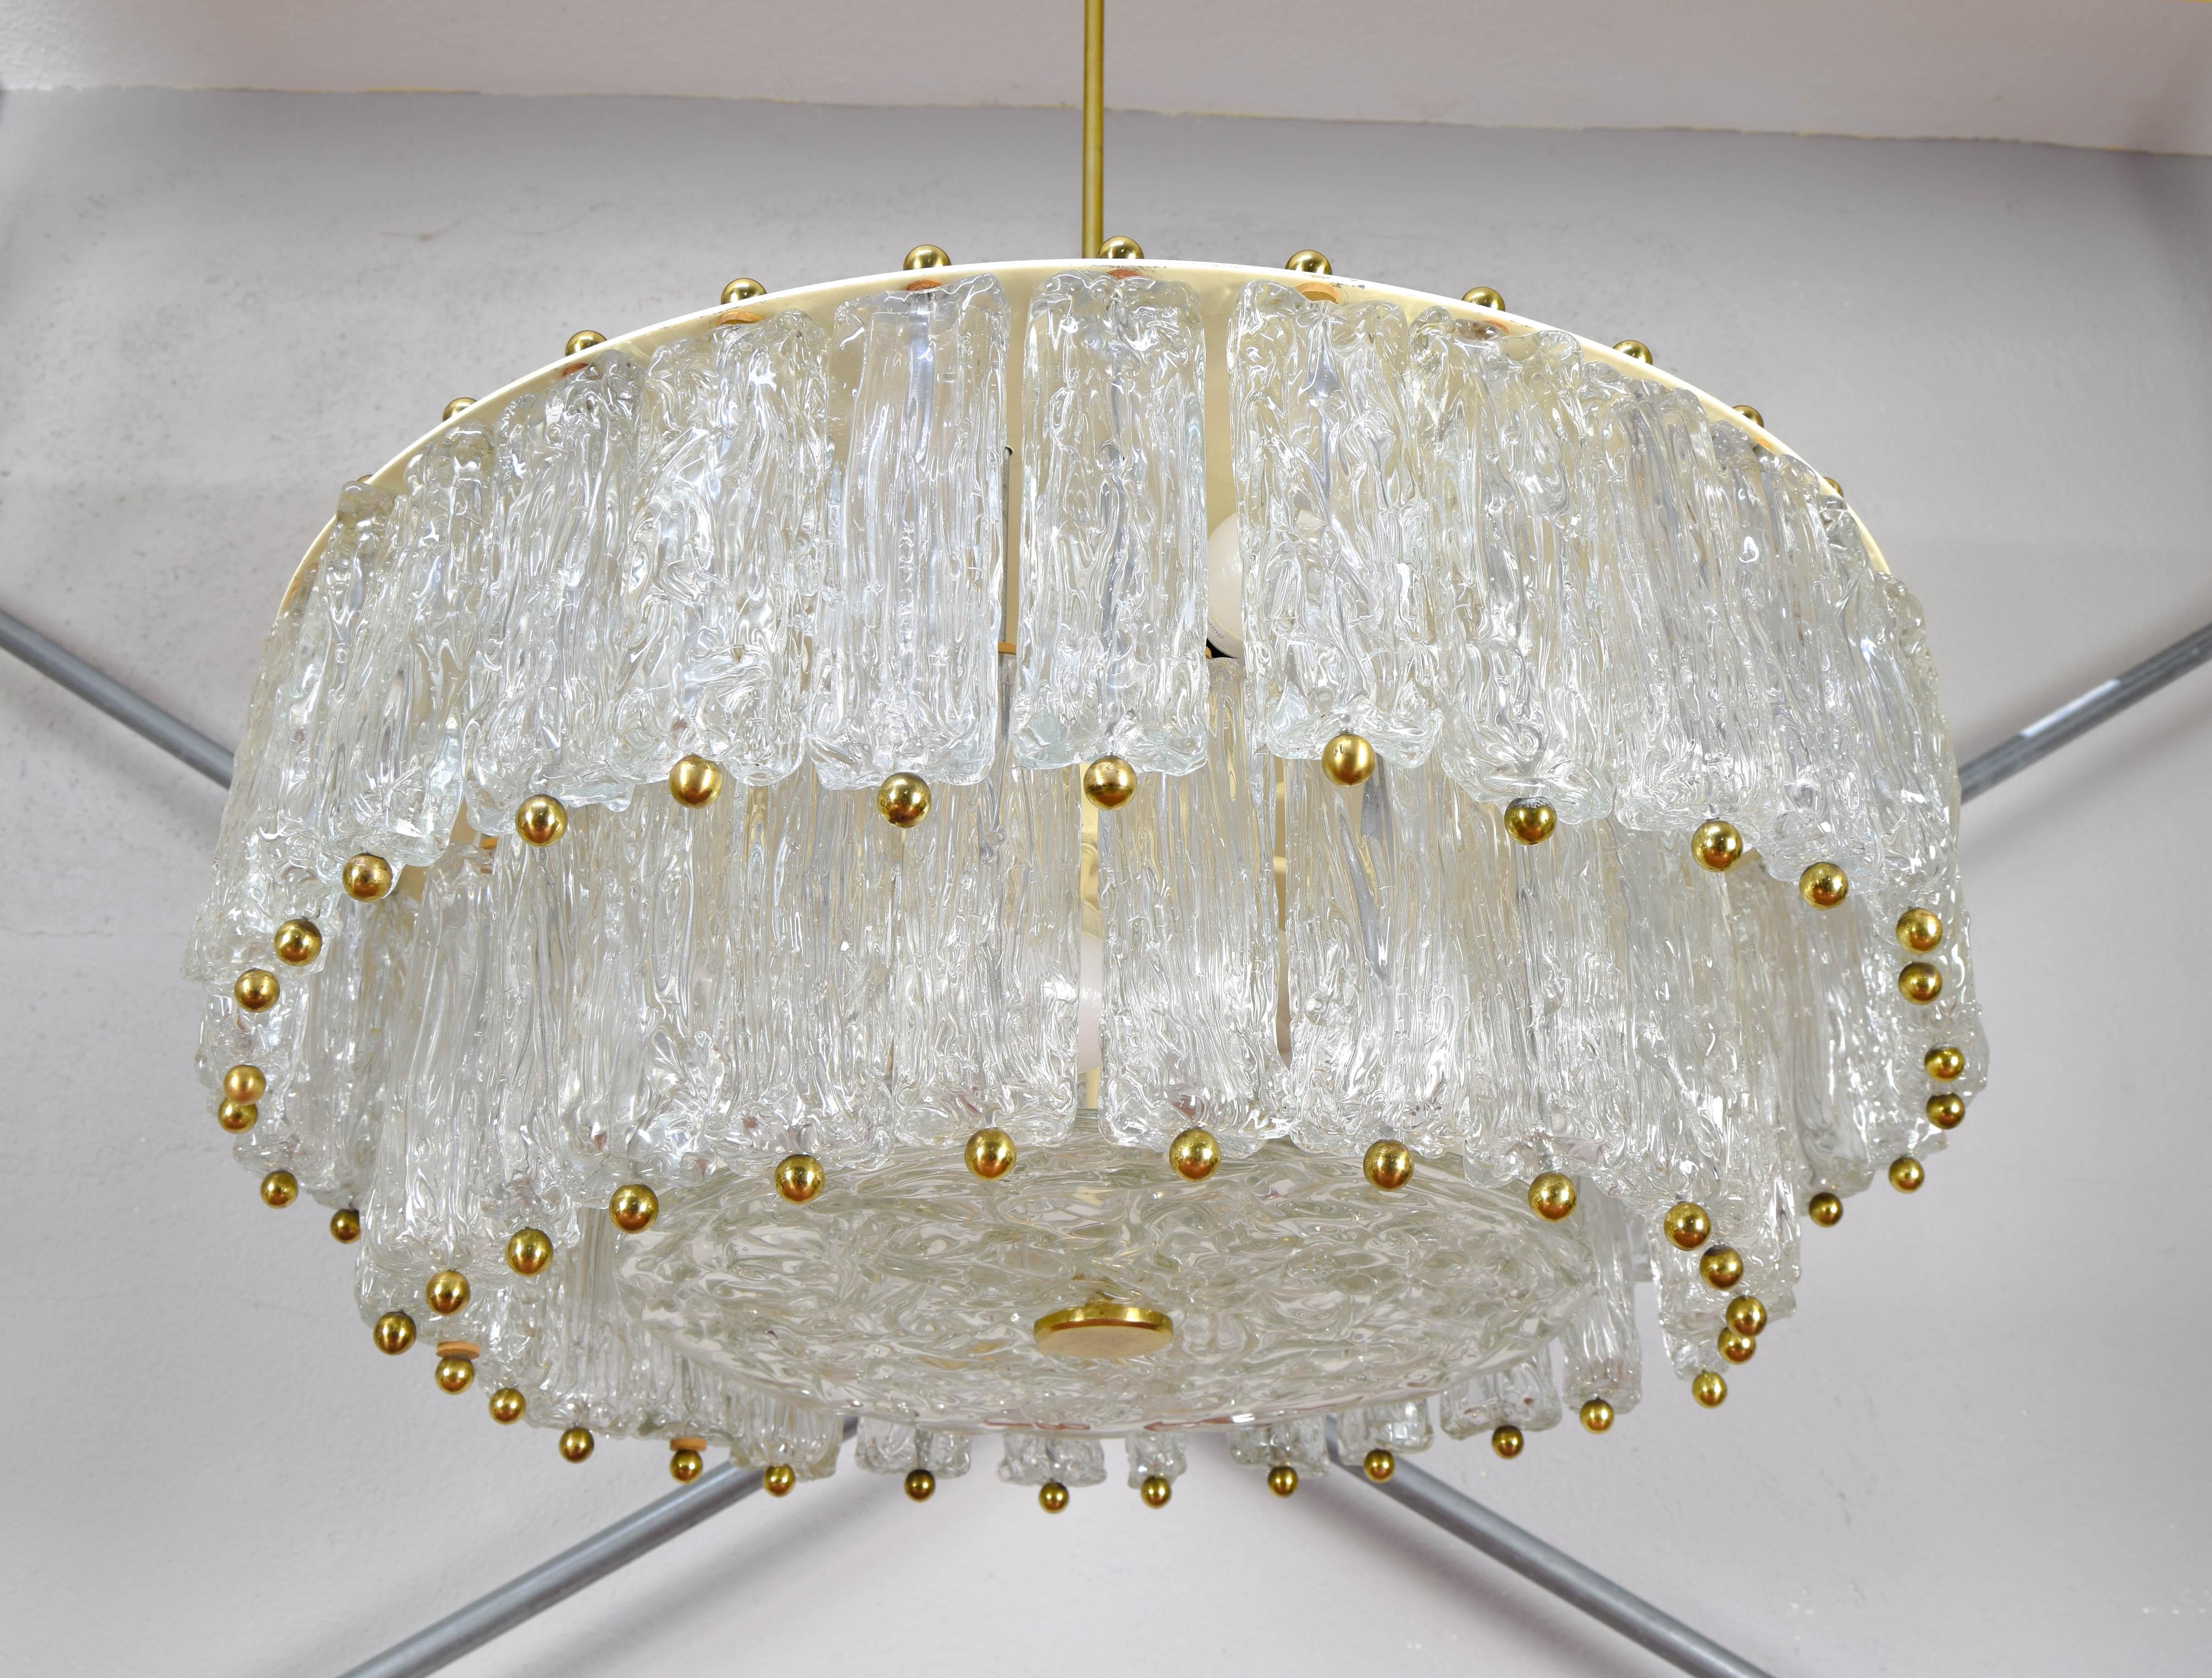 Spectacular piece. Almost impossible to see again.
Large chandelier by Barovier&Toso designed in the late 1950s and manufactured in Italy.
This impressive lamp is composed of a central lacquered steel disc from which two levels of hand-blown Murano